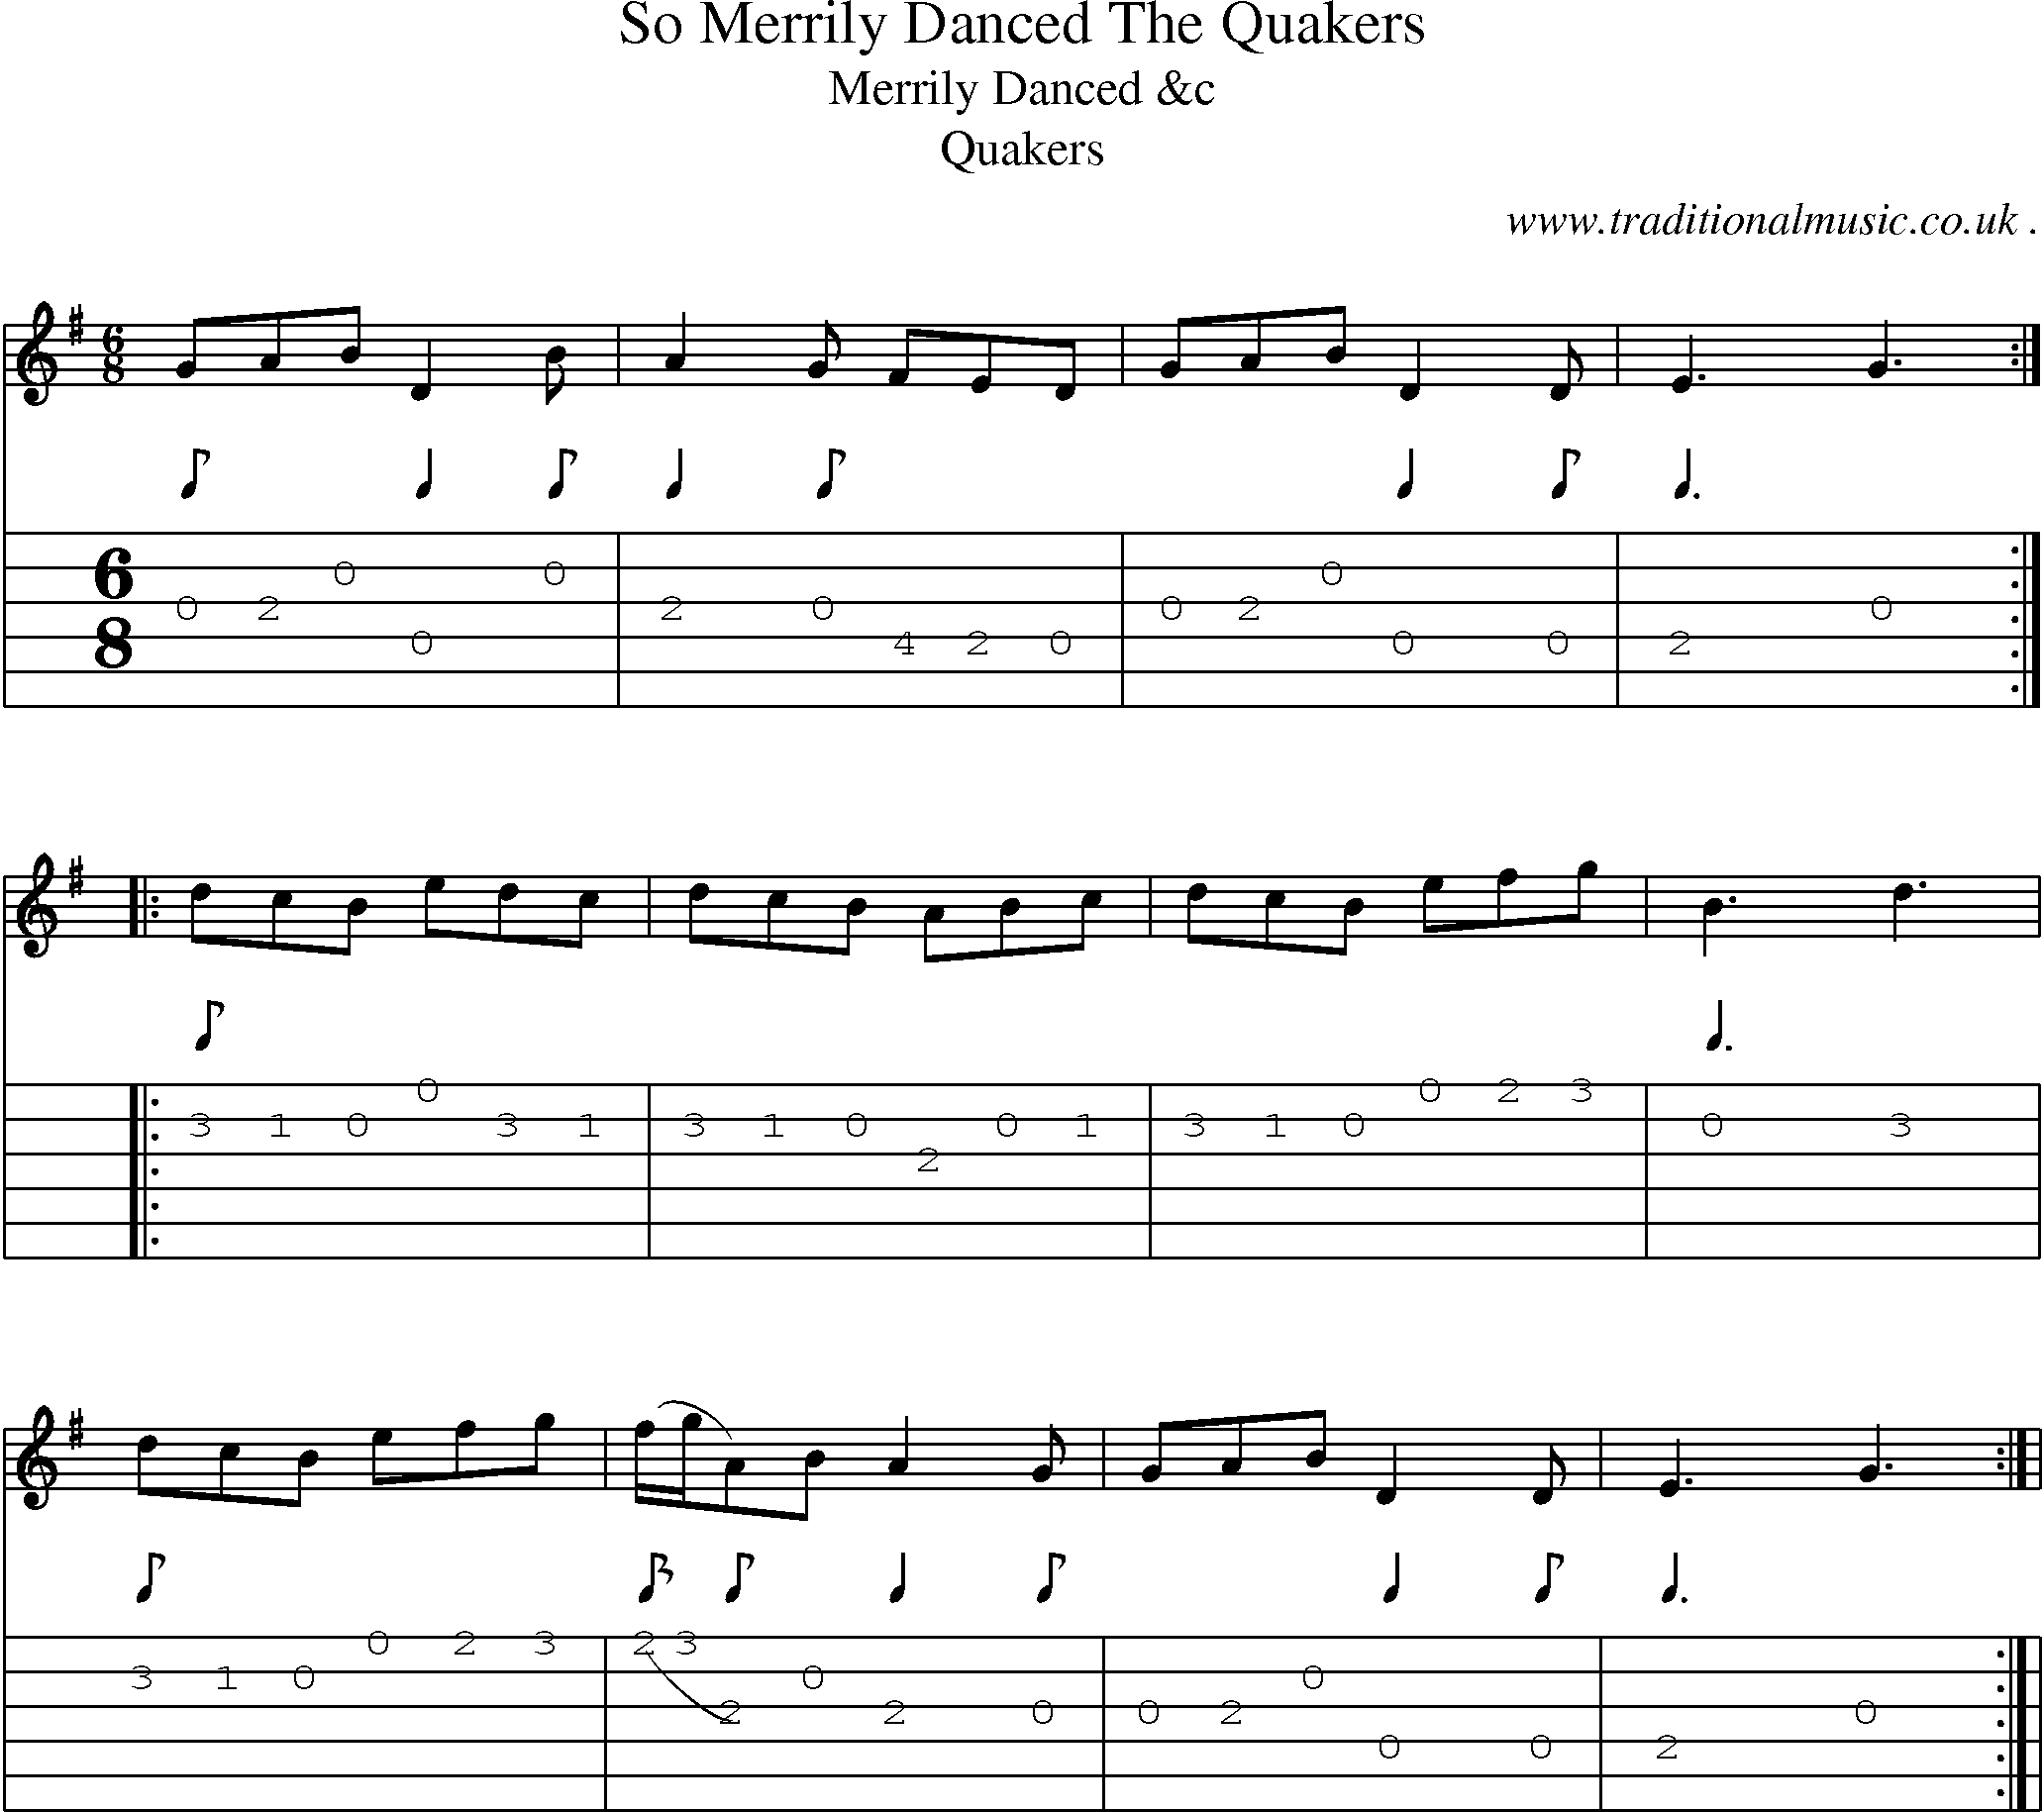 Sheet-Music and Guitar Tabs for So Merrily Danced The Quakers